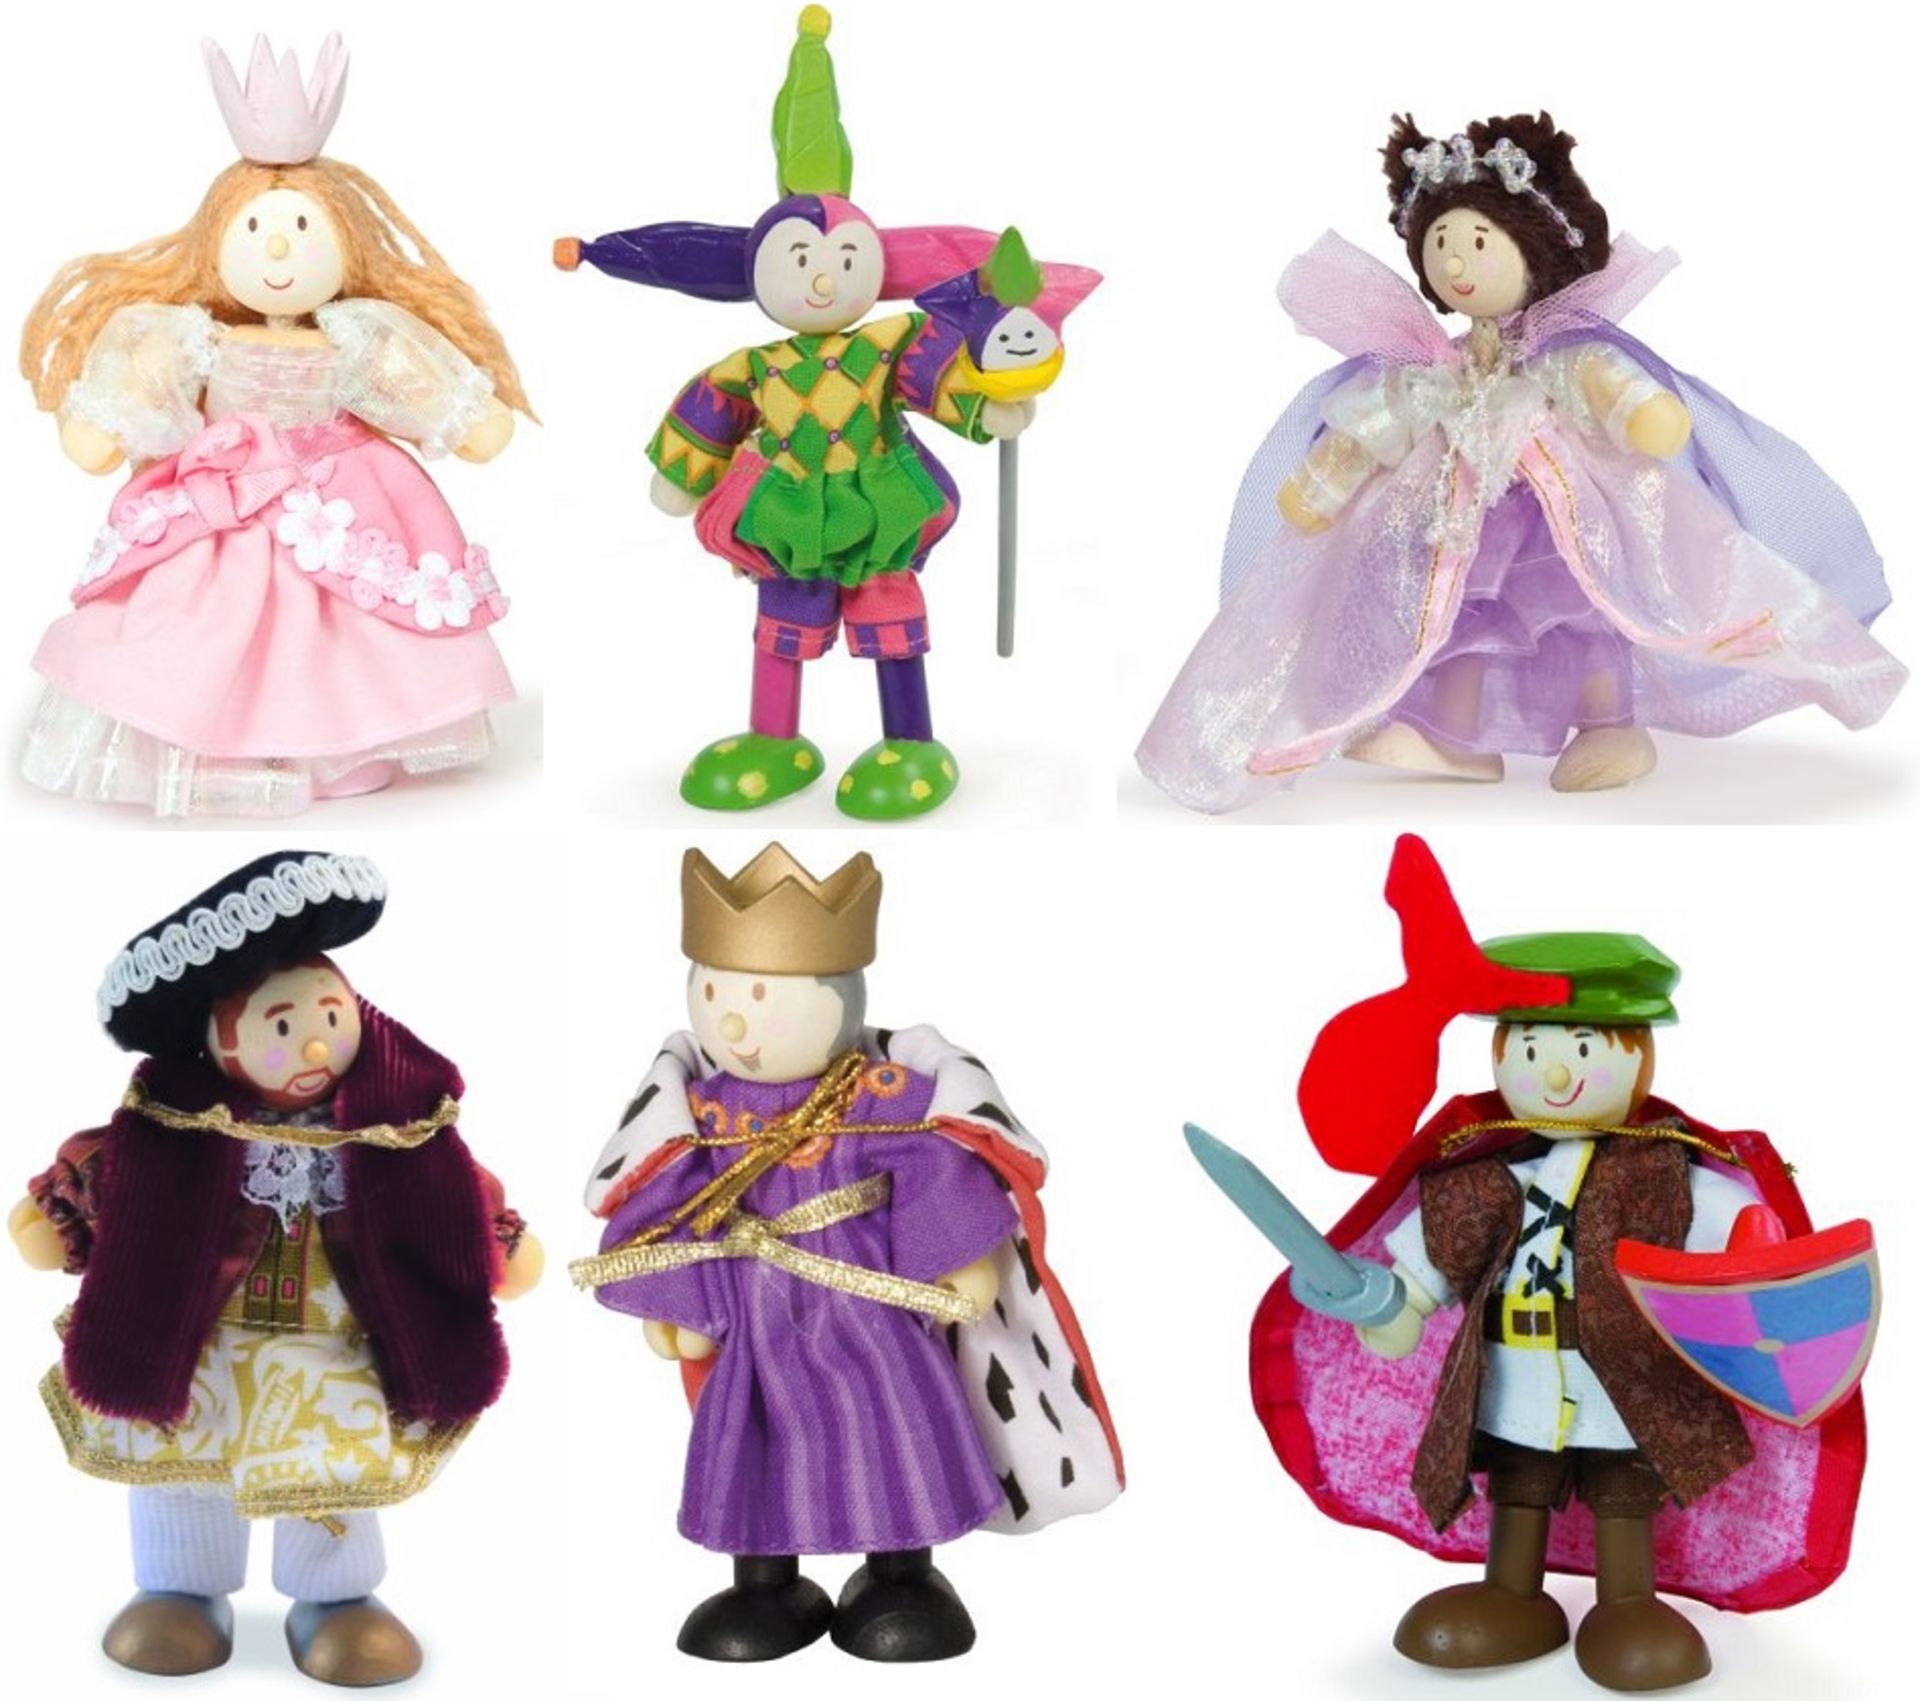 V Brand New A Lot Of Six Le Toy Van Budkins Bendy Wooden Royal Figures Includes King-Queen-